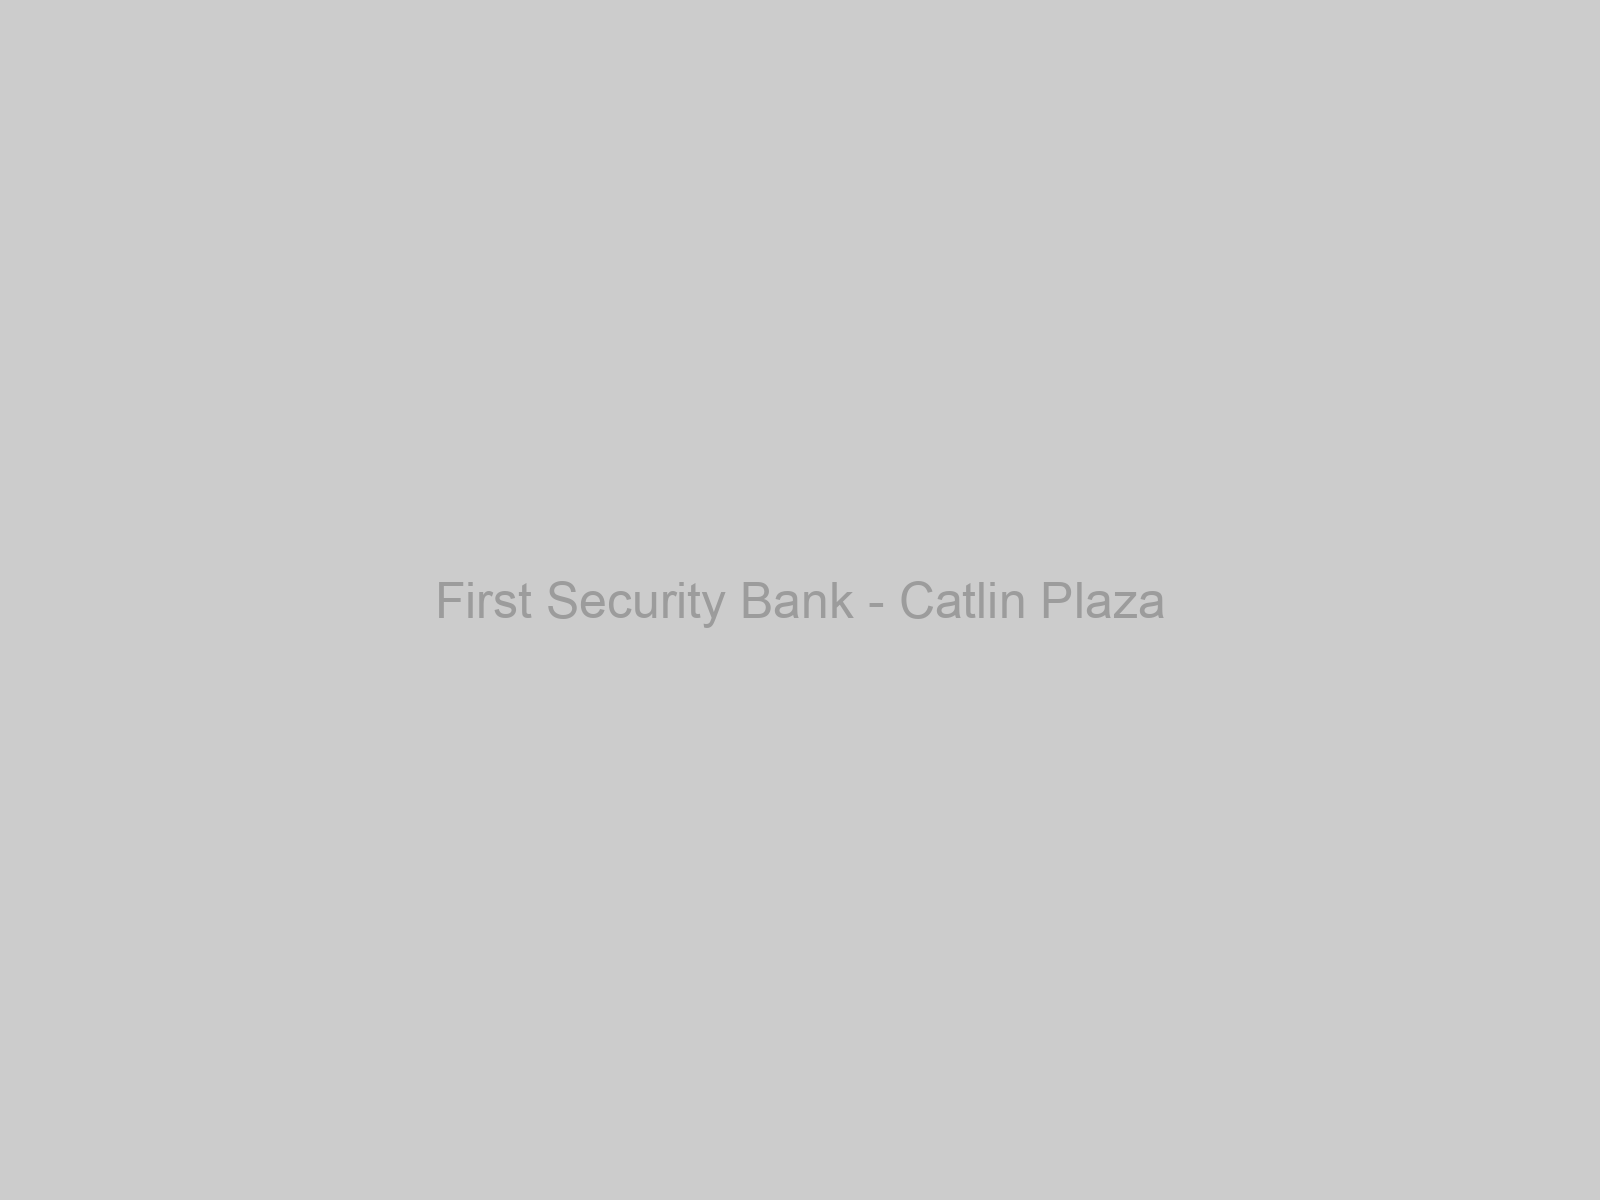 First Security Bank - Catlin Plaza